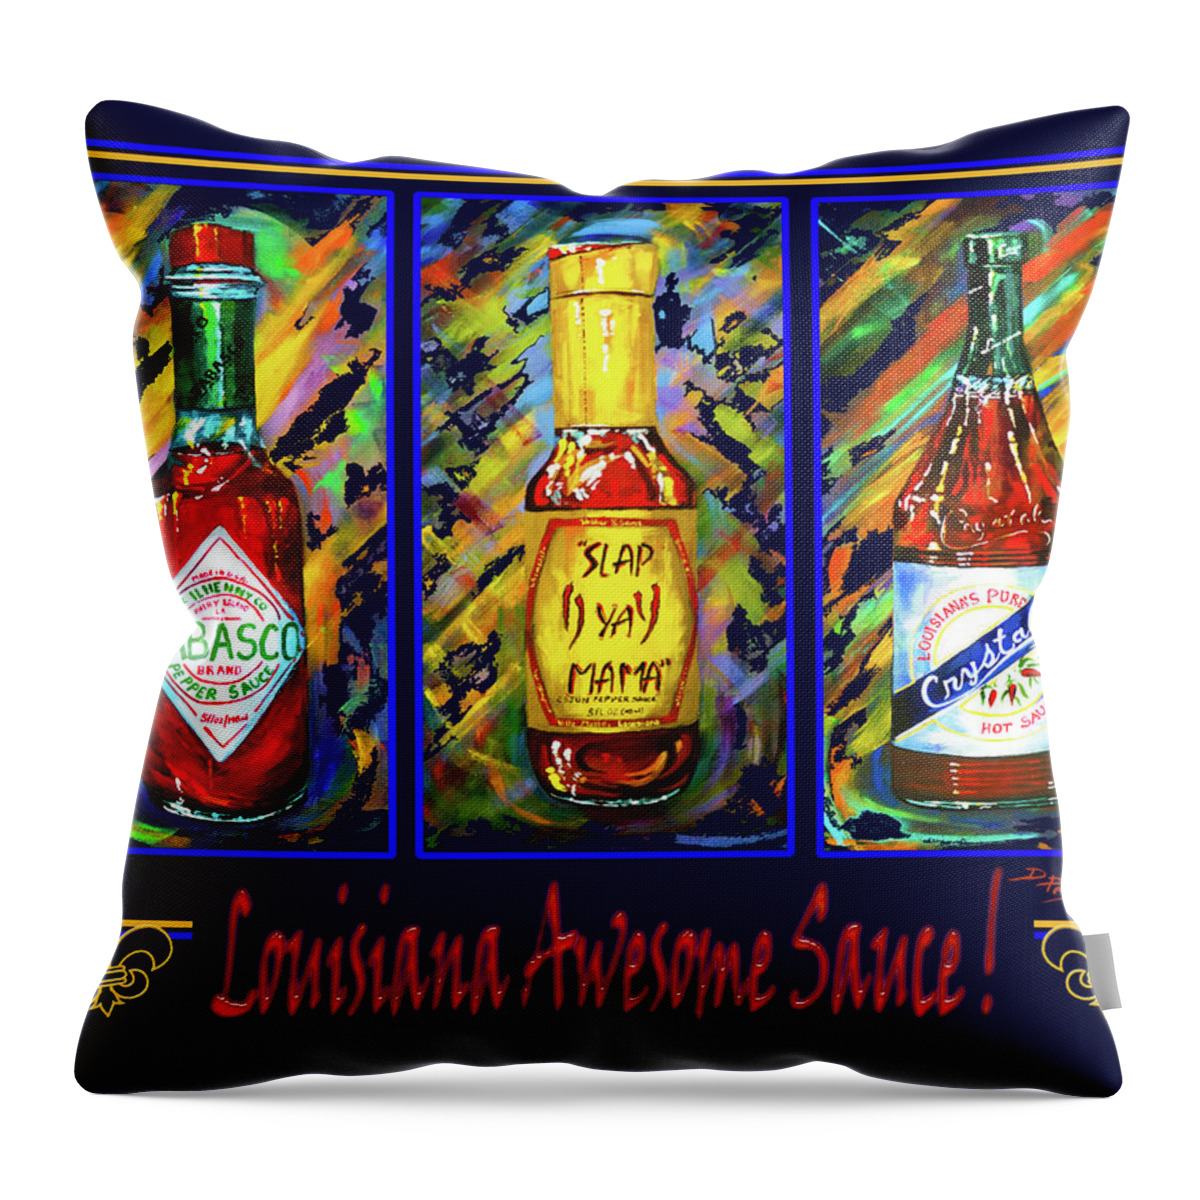 Louisiana Hot Sauce Throw Pillow featuring the painting Louisiana Awesome Sauces by Dianne Parks